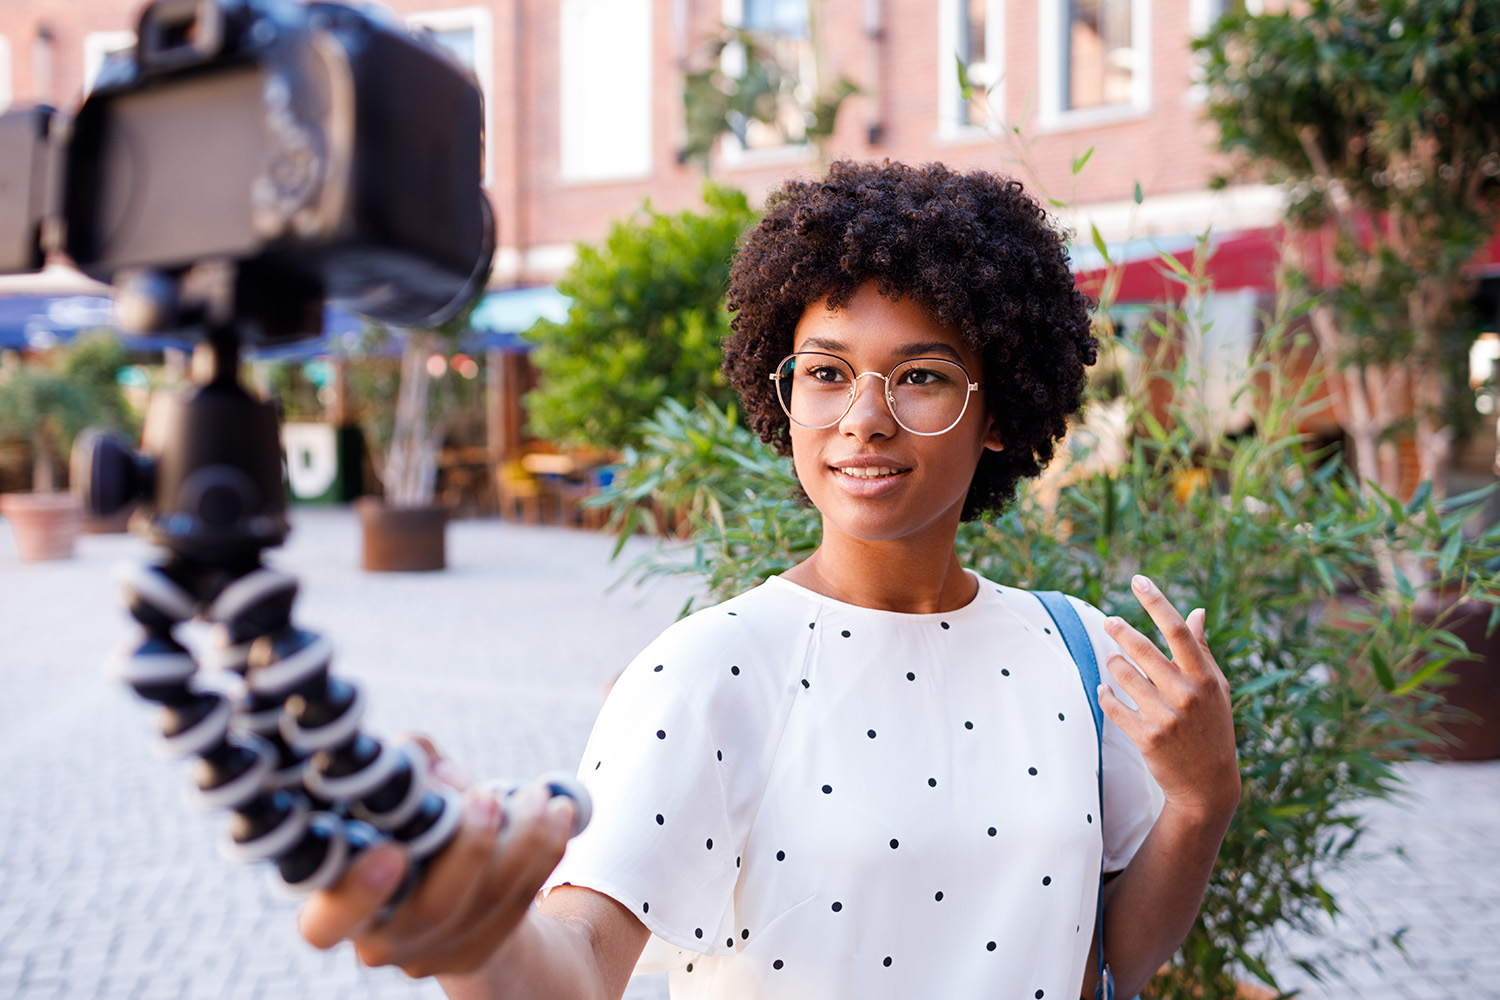 Image of a young woman in street with camera